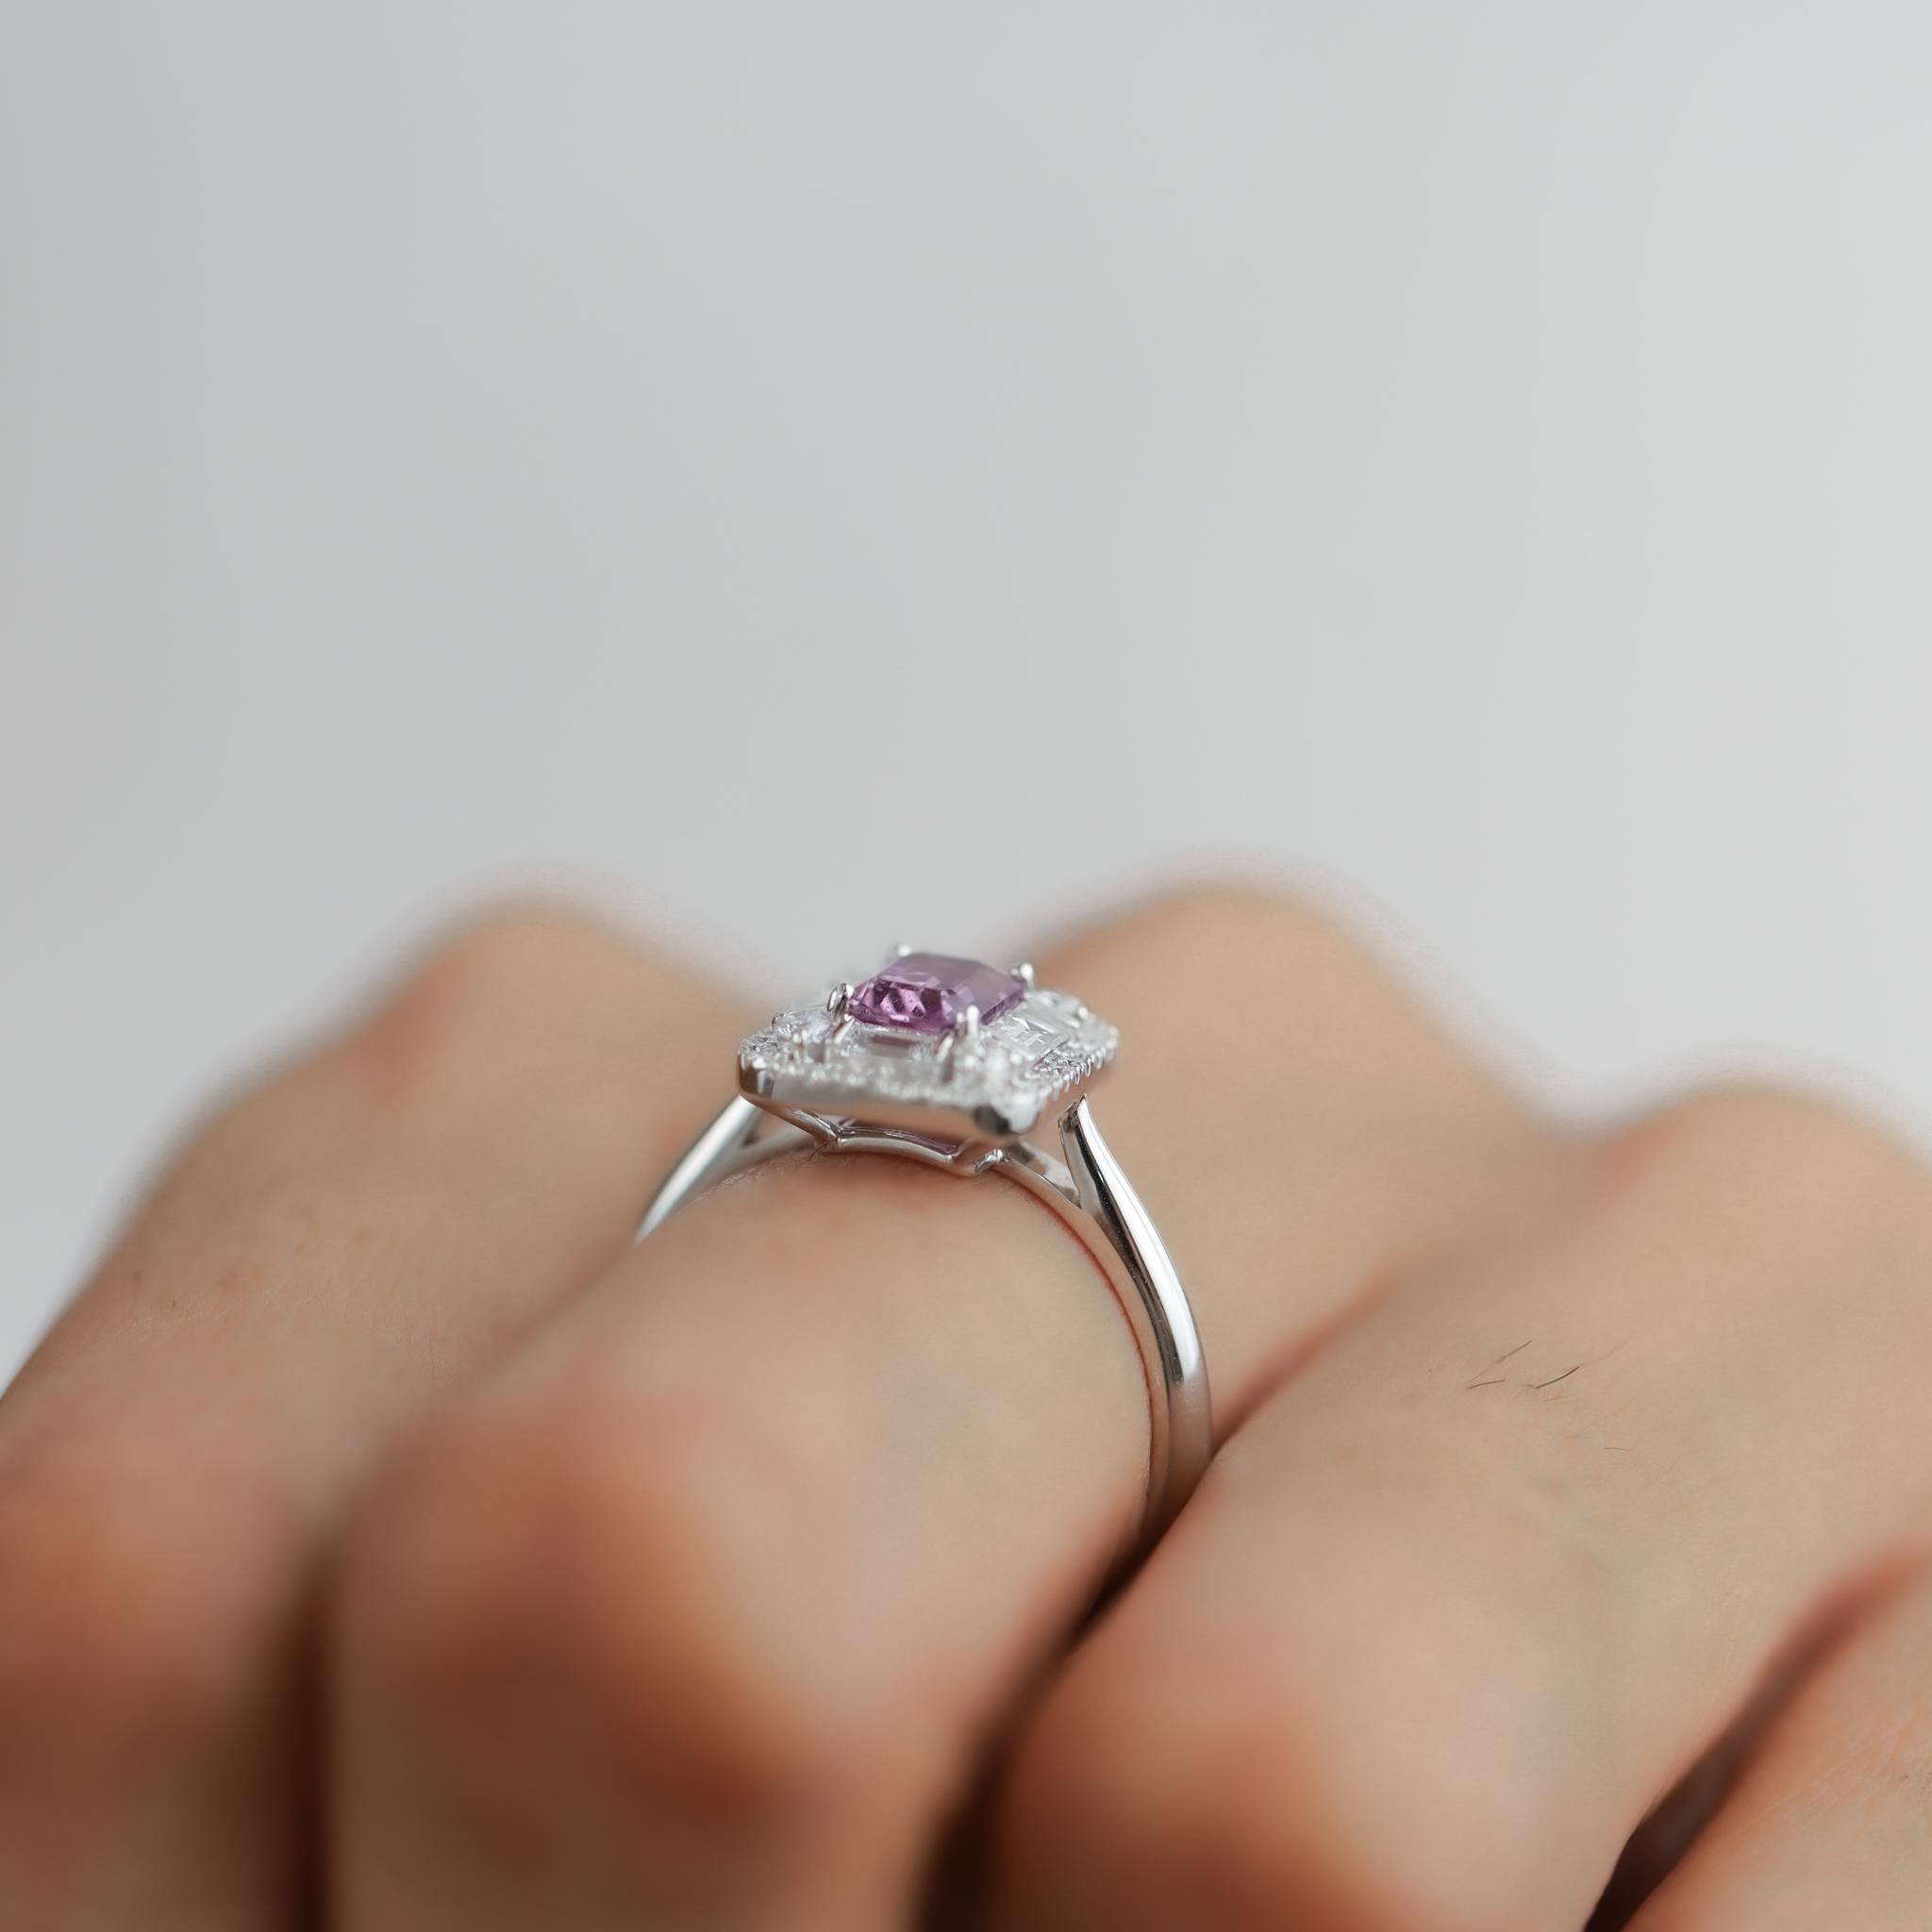 1 Carat Pink Sapphire Diamond Cocktail Engagement Ring in 18k White Gold For Sale 2